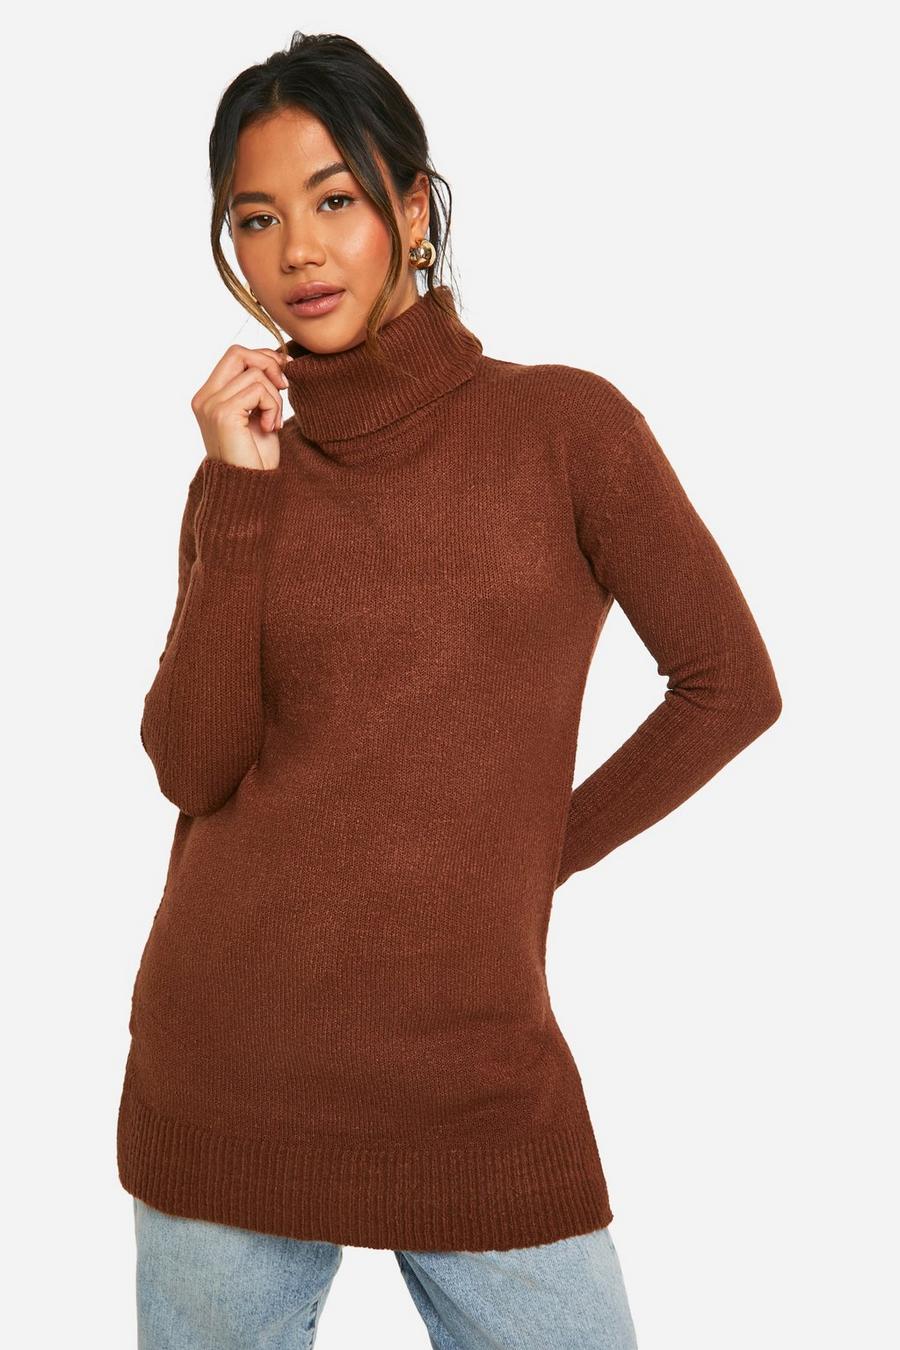 Chocolate Turtleneck Knitted Tunic